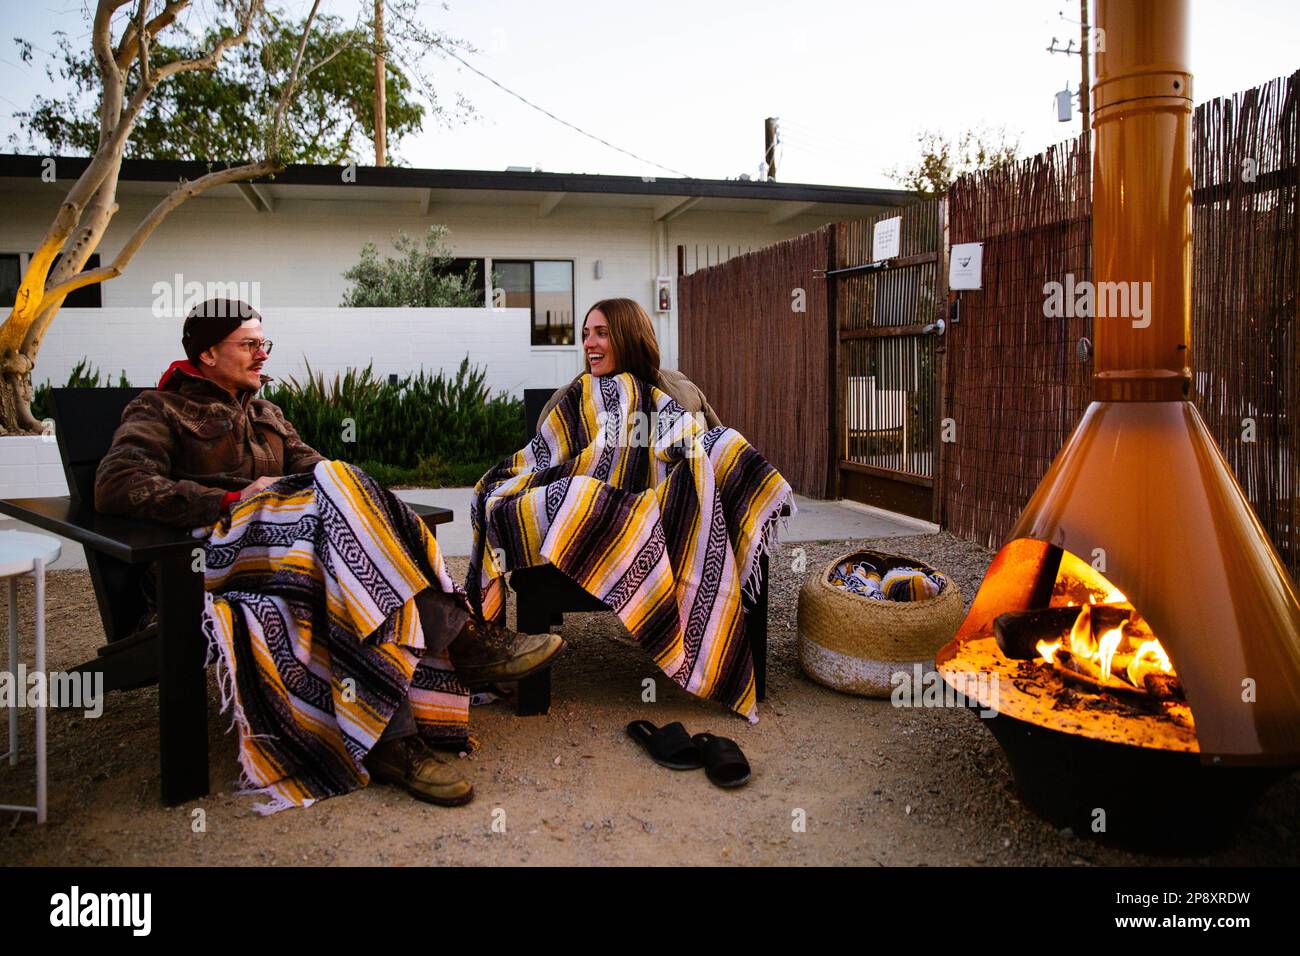 A couple sit outside at dusk and enjoy a fire in the chiminea in the courtyard of a roadside motel in the high desert. Stock Photo